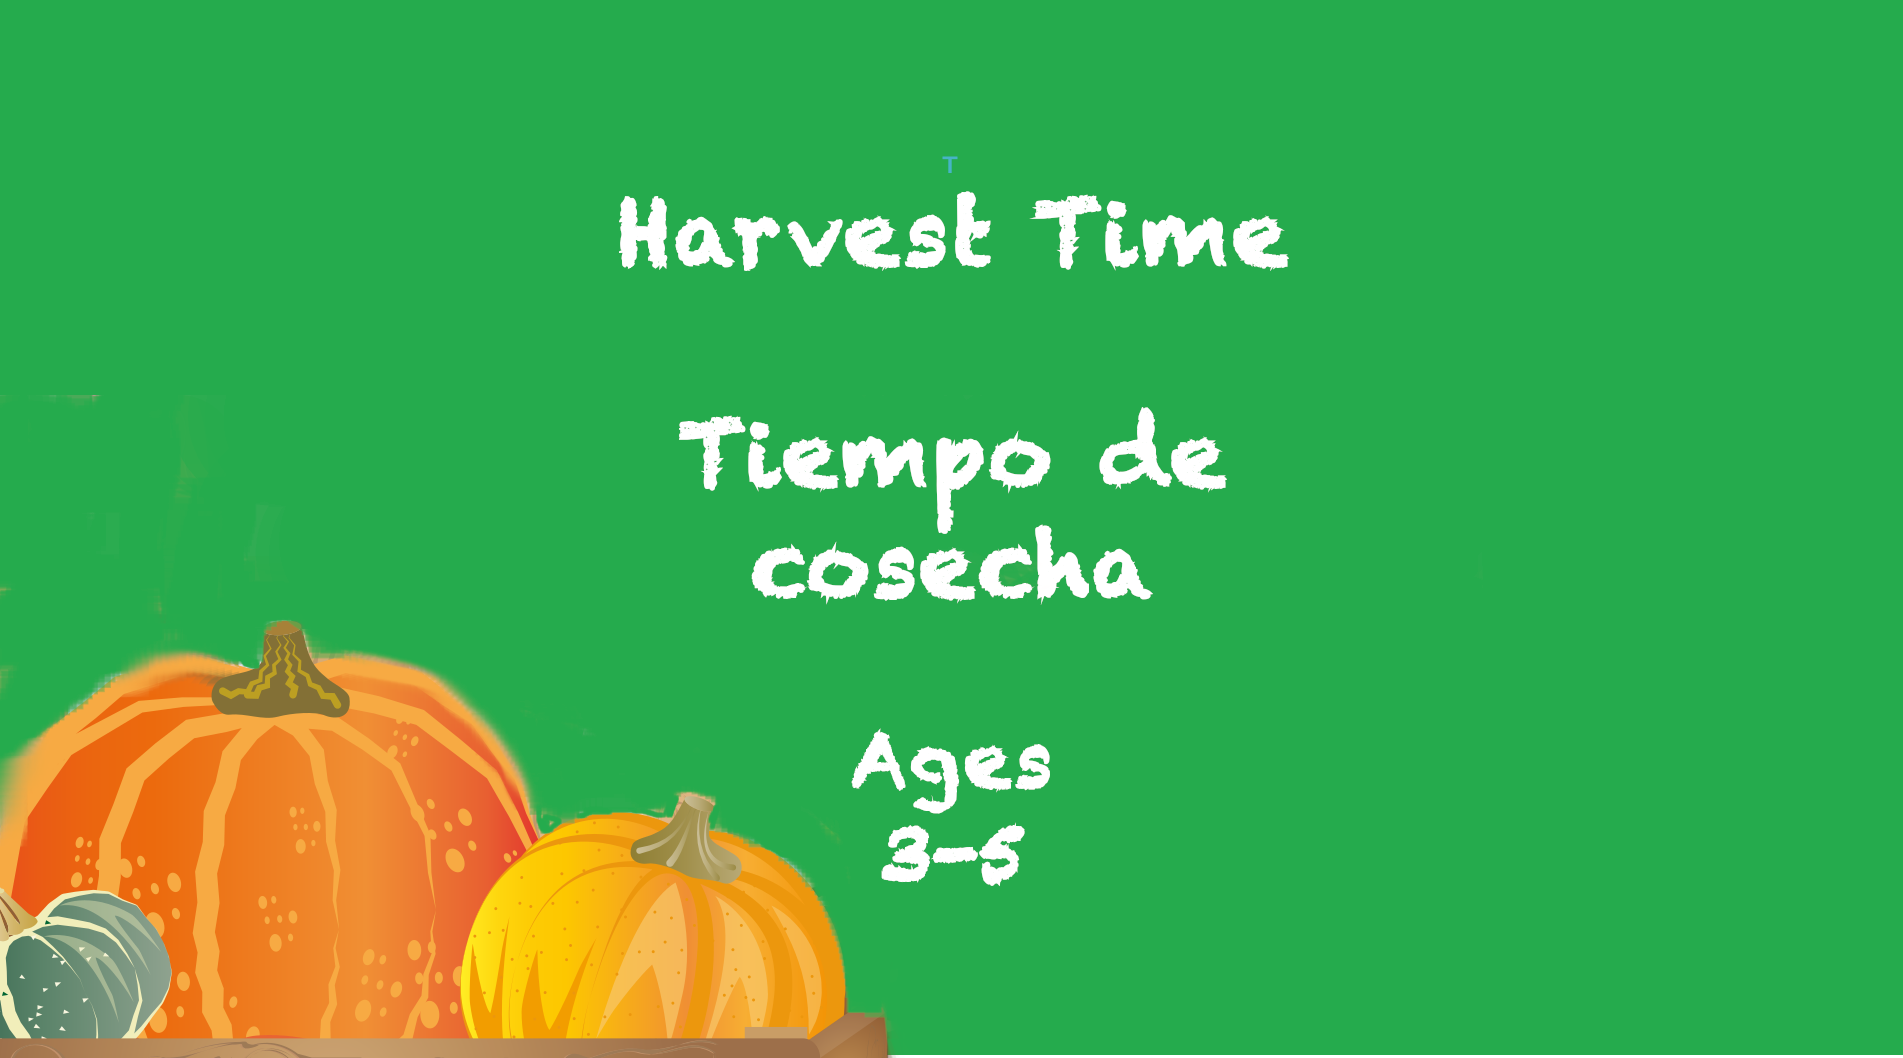 Harvest Time for 3-5 Year olds